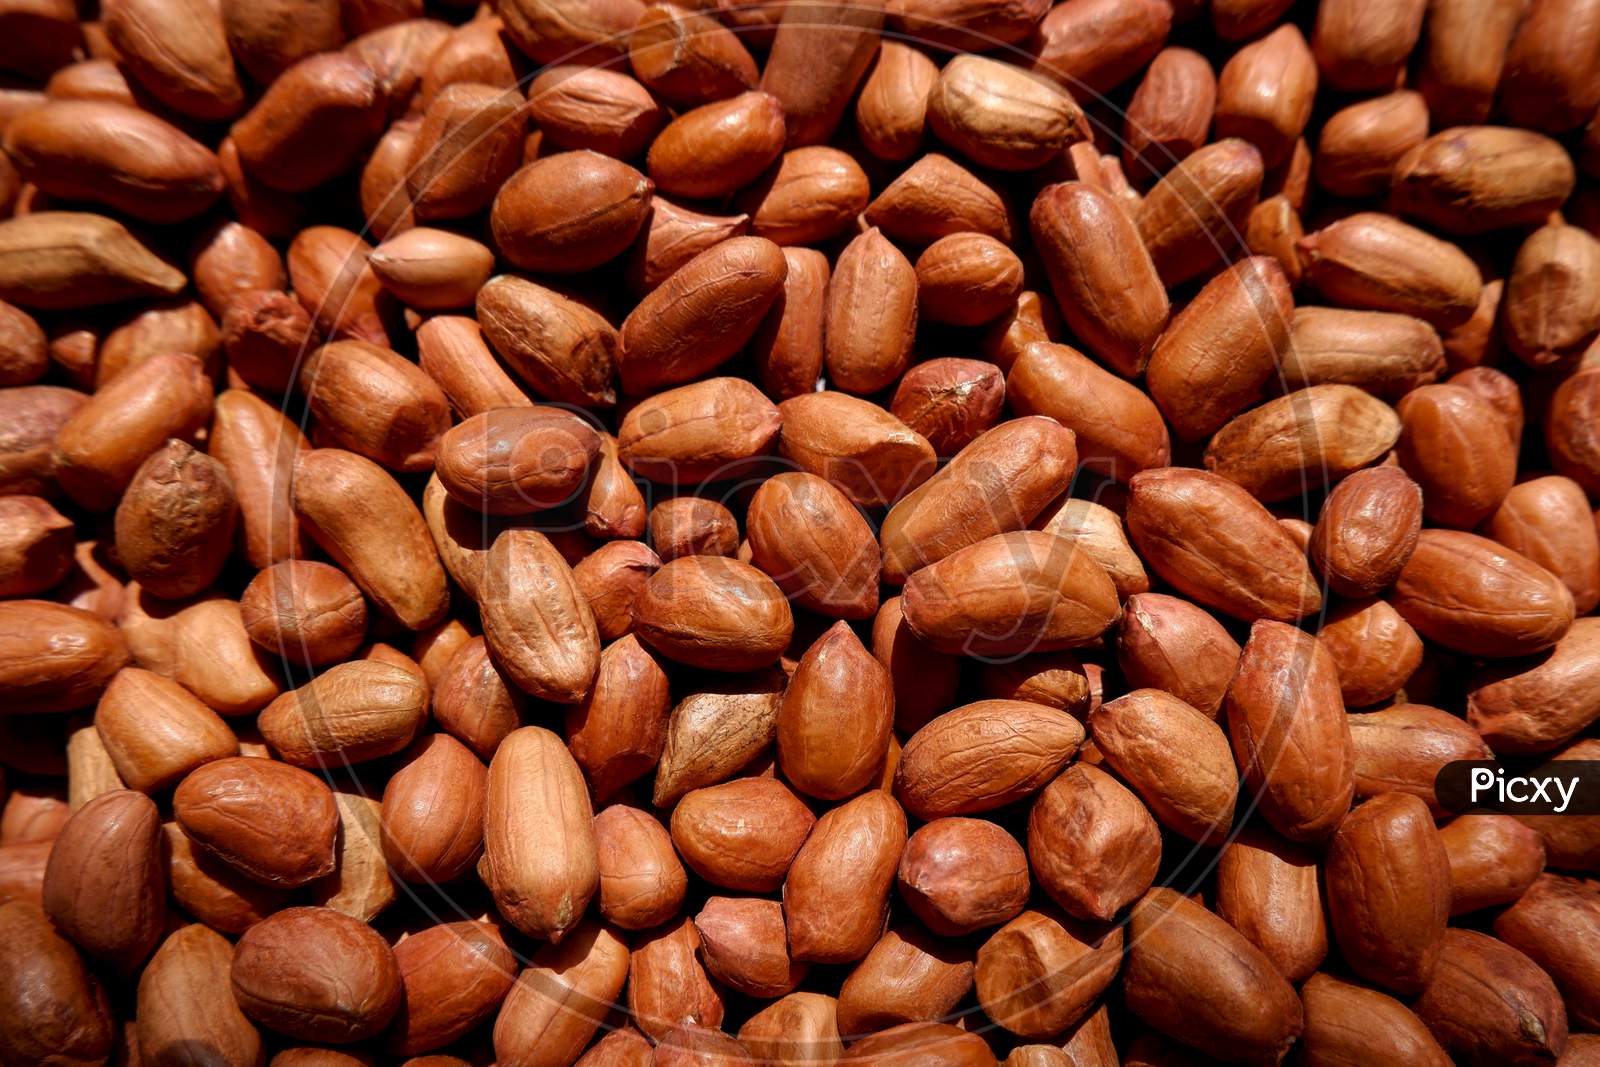 A Close Up View Of Brown Color Groundnuts Or Peanuts Gathering